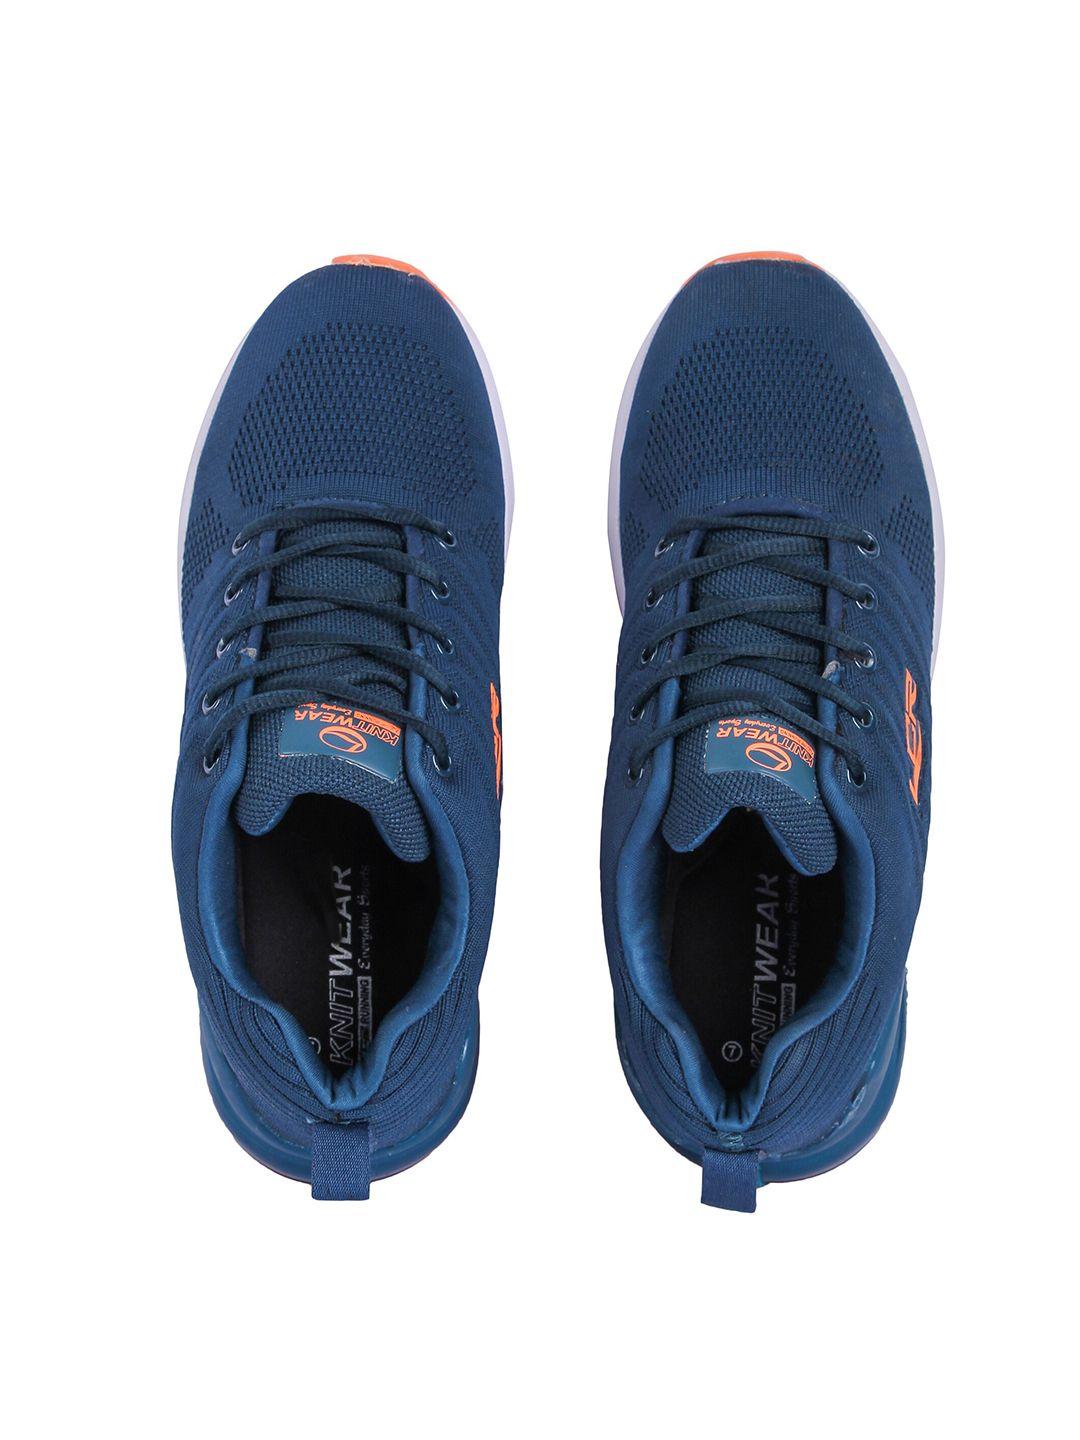 Lancer Men Teal Textile Running Lace-Ups Non-Marking Sports Shoes